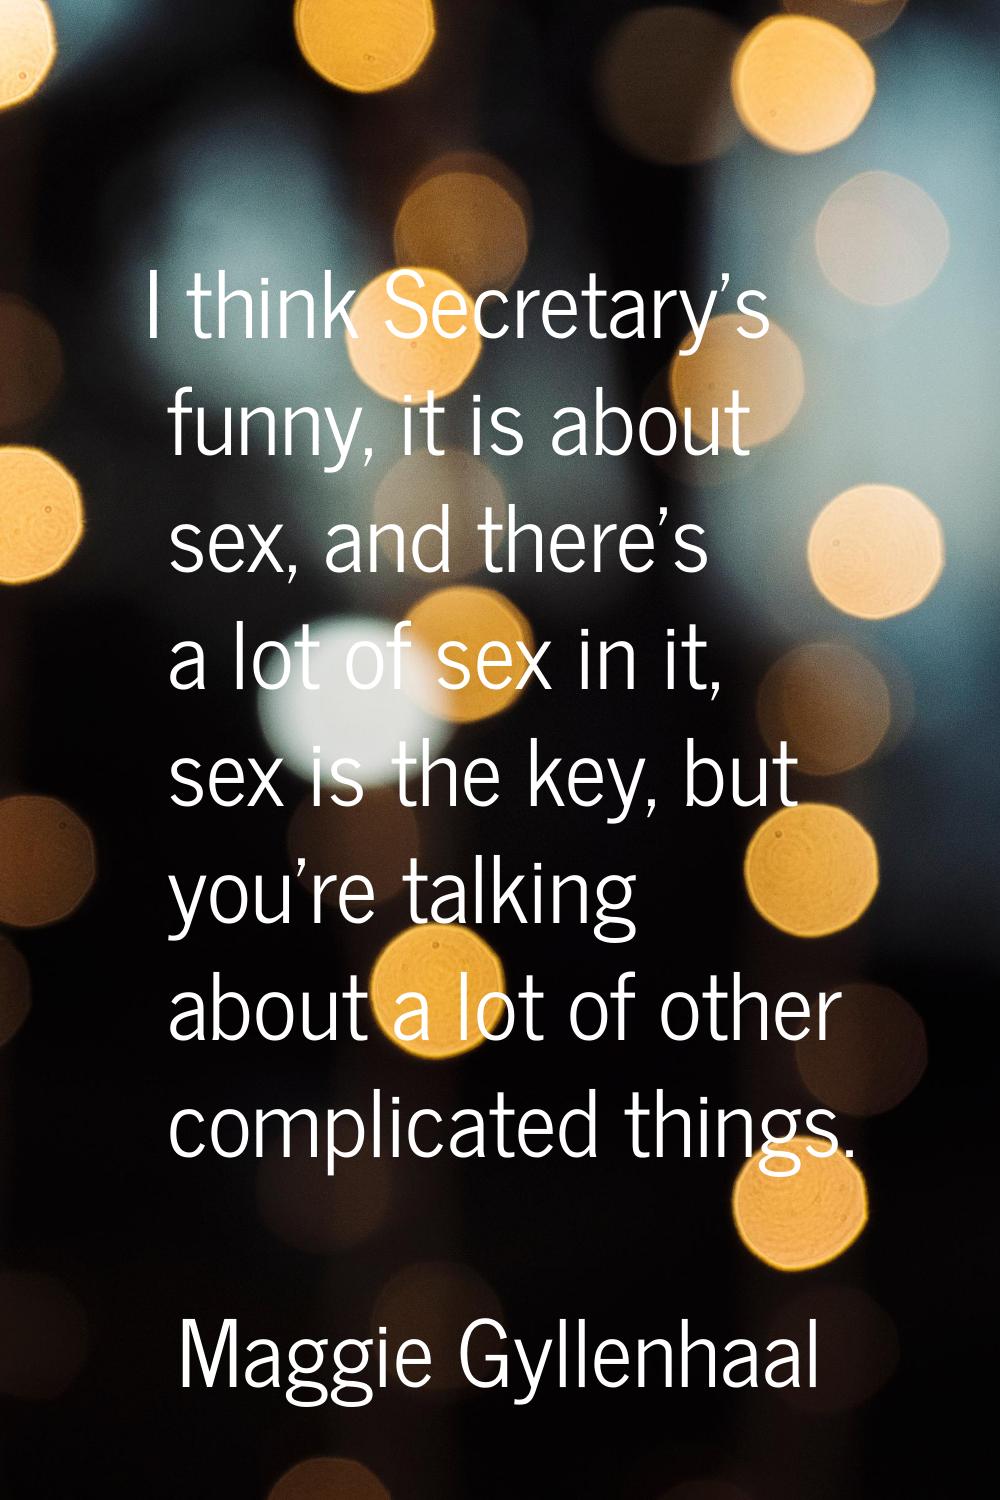 I think Secretary's funny, it is about sex, and there's a lot of sex in it, sex is the key, but you